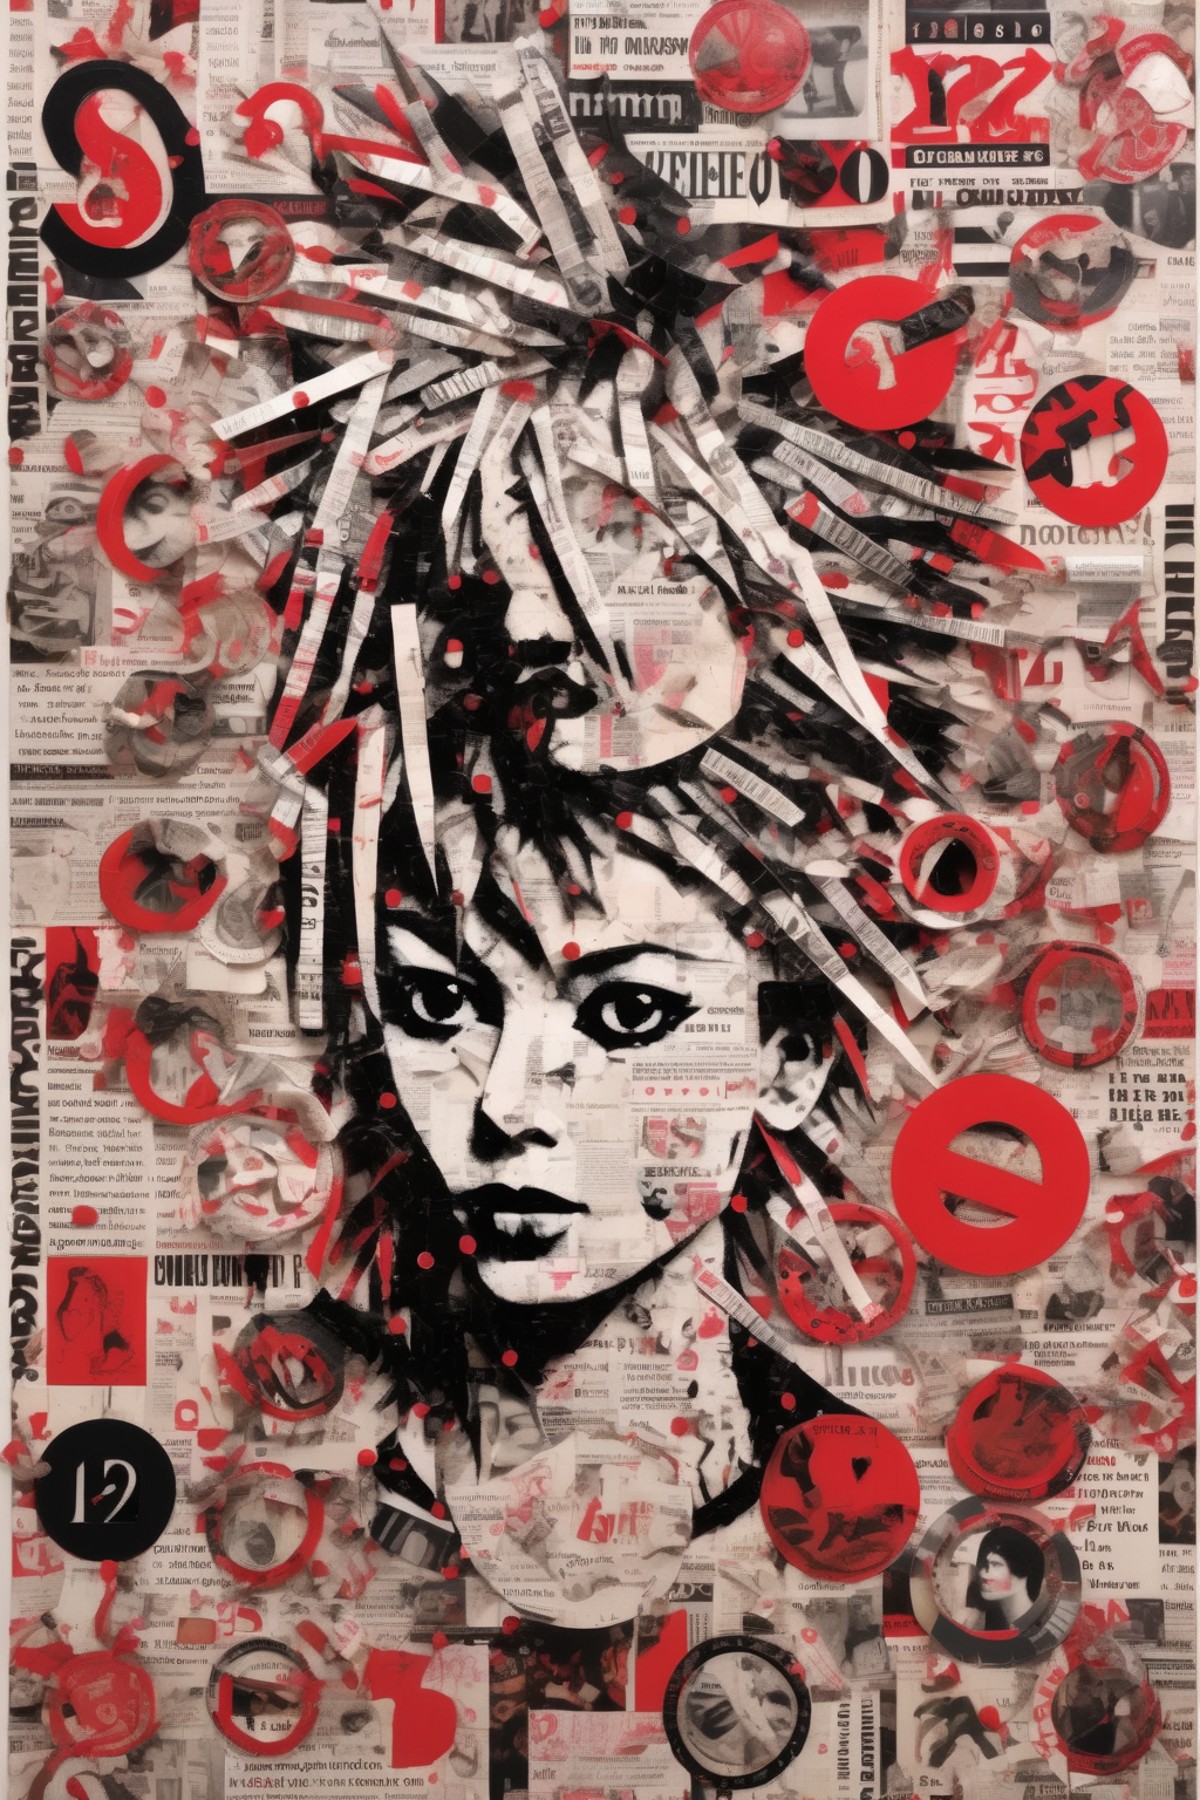 <lora:Punk Collage:1>Punk Collage - black, white and red, flat, 2D punk rock poster made up of magazine clippings that rep...